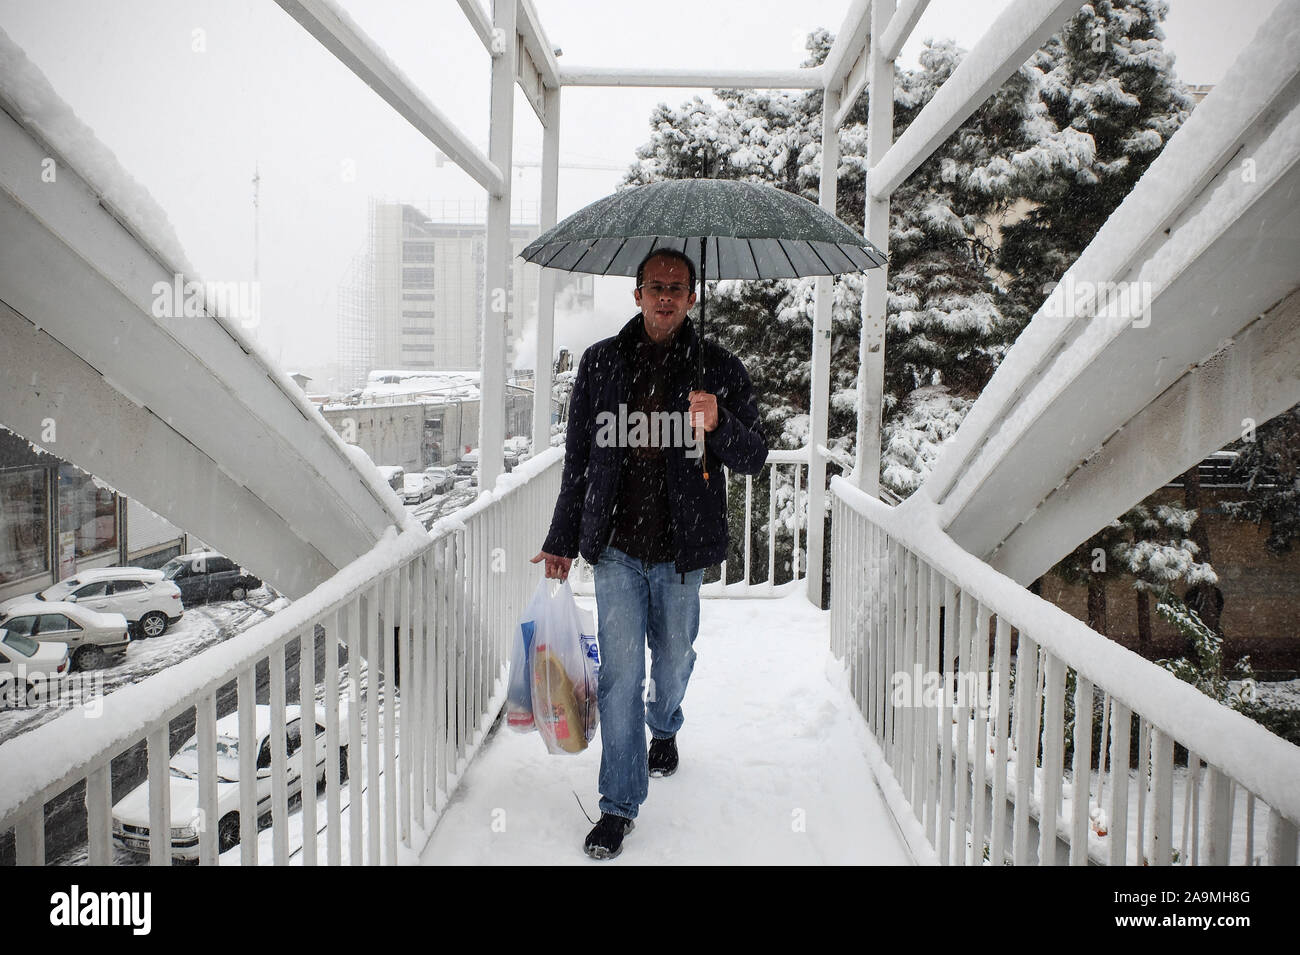 Tehran, Iran. 16th Nov, 2019. Iranians walk amid the snow in the capital Tehran. Heavy snowfall blanketed the streets of north Tehran on Saturday, causing traffic chaos and forcing the closure of schools, authorities in the Iranian capital said. Credit: Rouzbeh Fouladi/ZUMA Wire/Alamy Live News Stock Photo